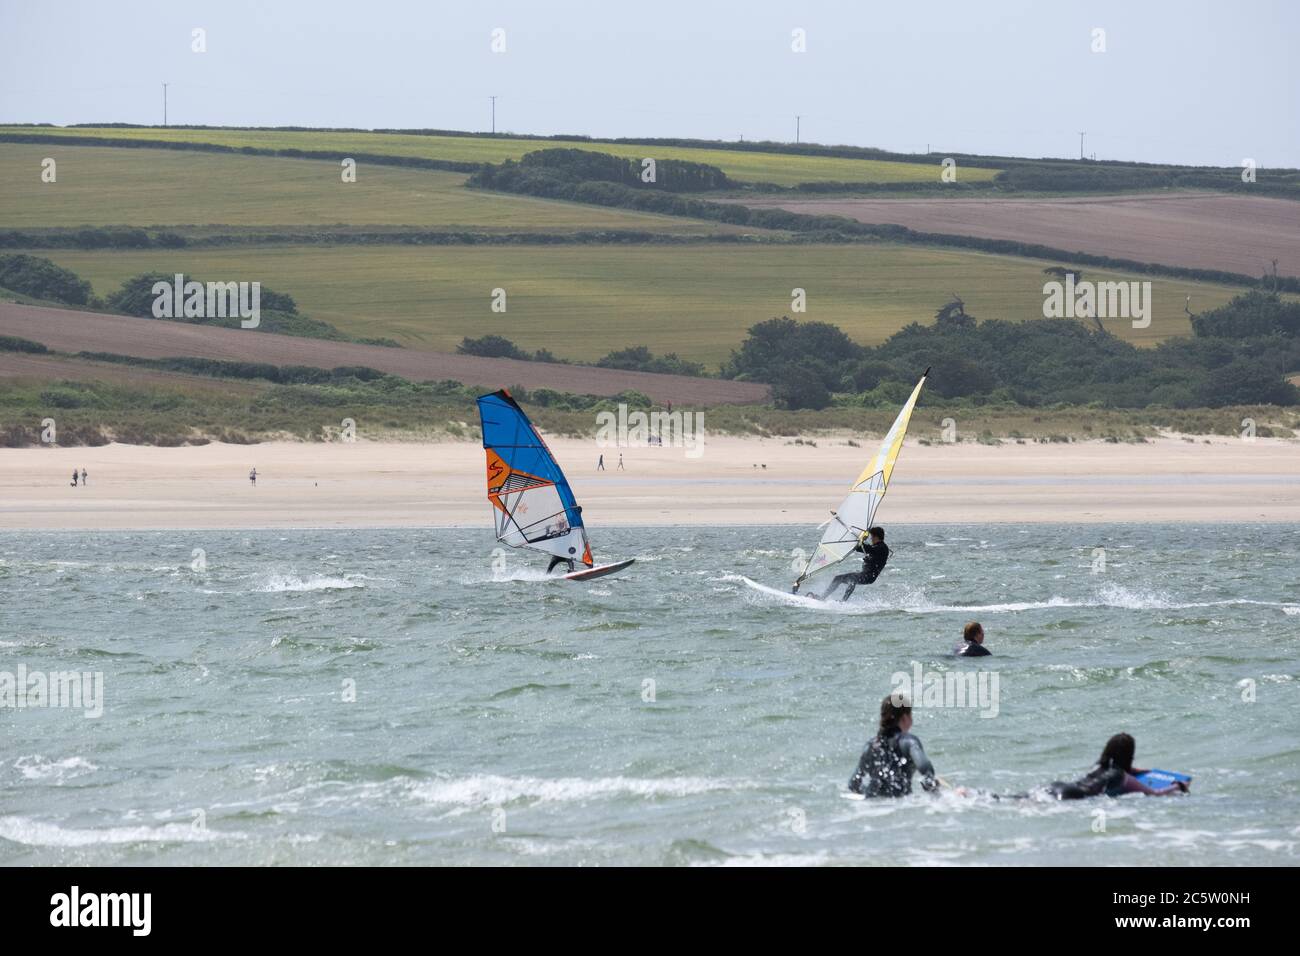 Daymer Bay, Rock, Cornwall, UK. 5th July 2020. UK Weather. A strong wind didn't keep people off the beach at Daymer bay this lunchtime. Ideal weather for a spot of windsurfing. Credit CWPIX /  Alamy Live News. Stock Photo